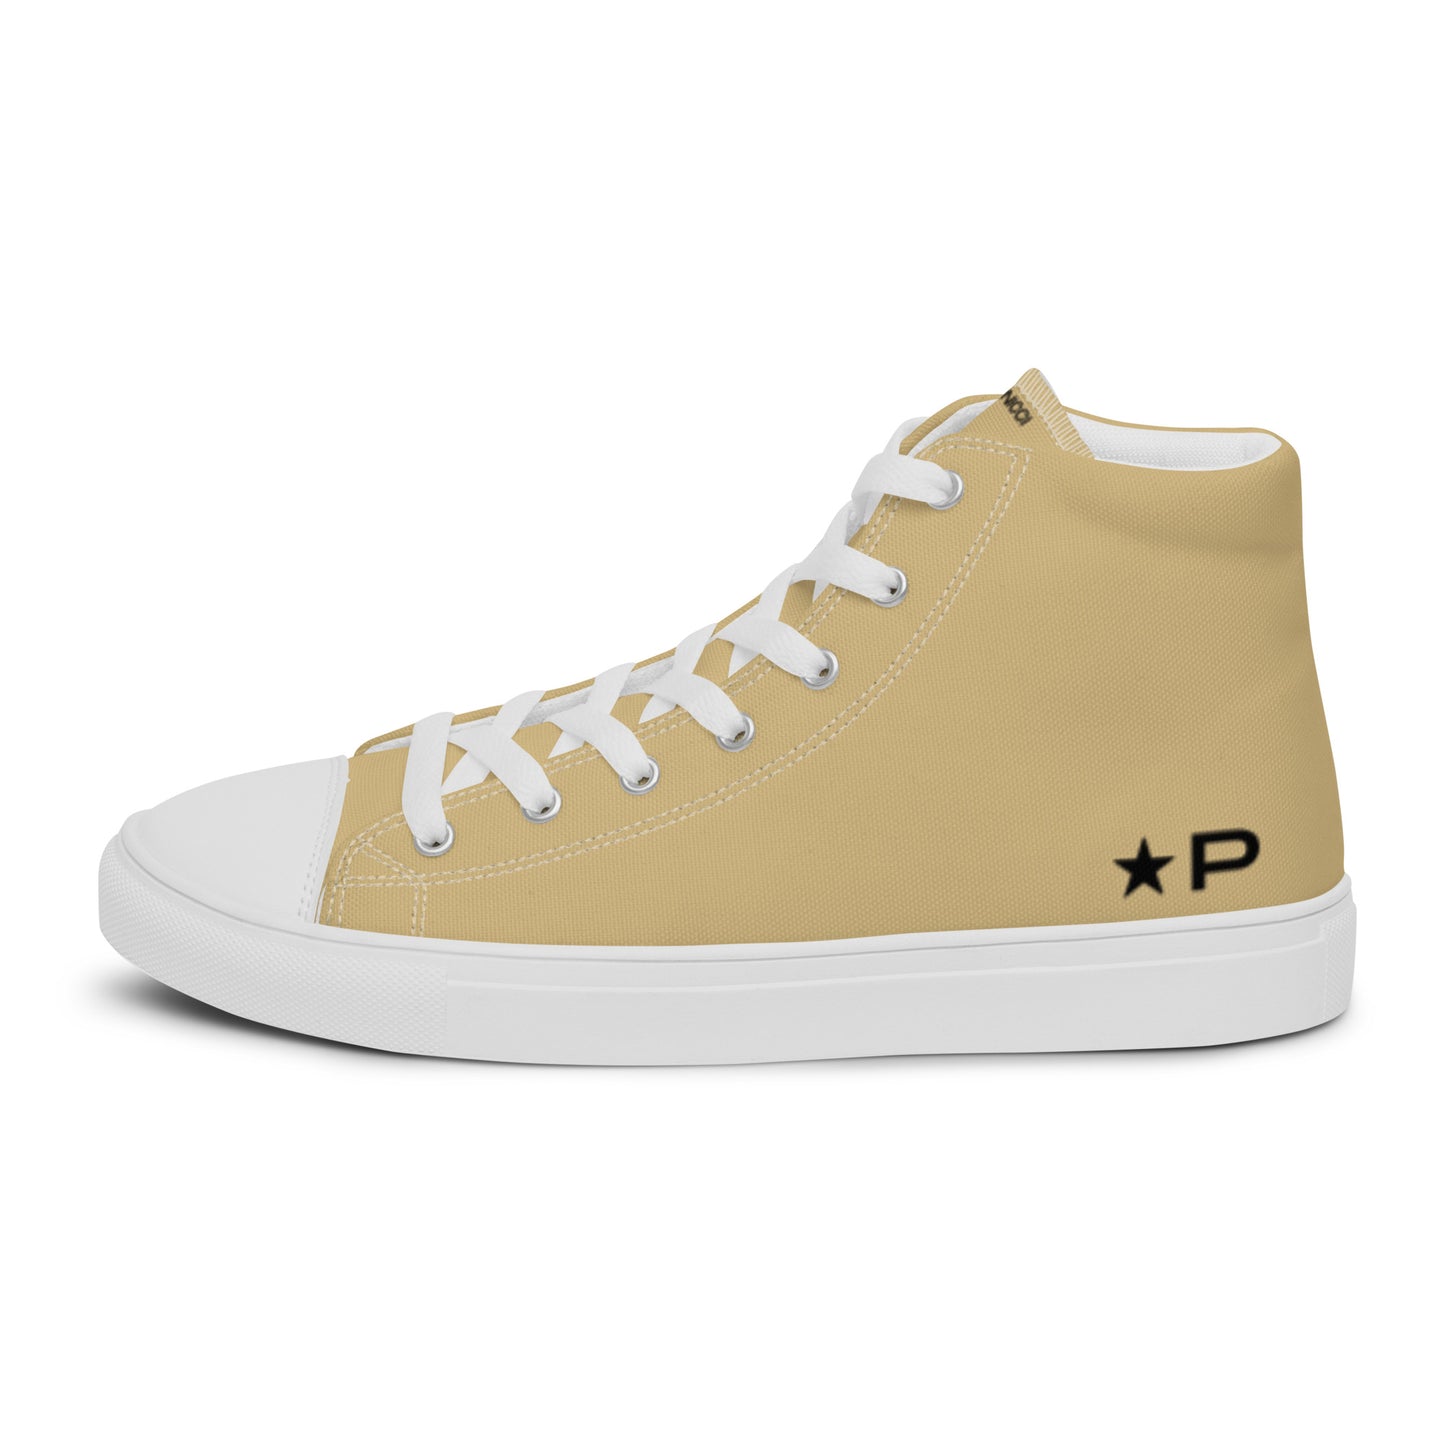 Men’s high top canvas shoes Solid9